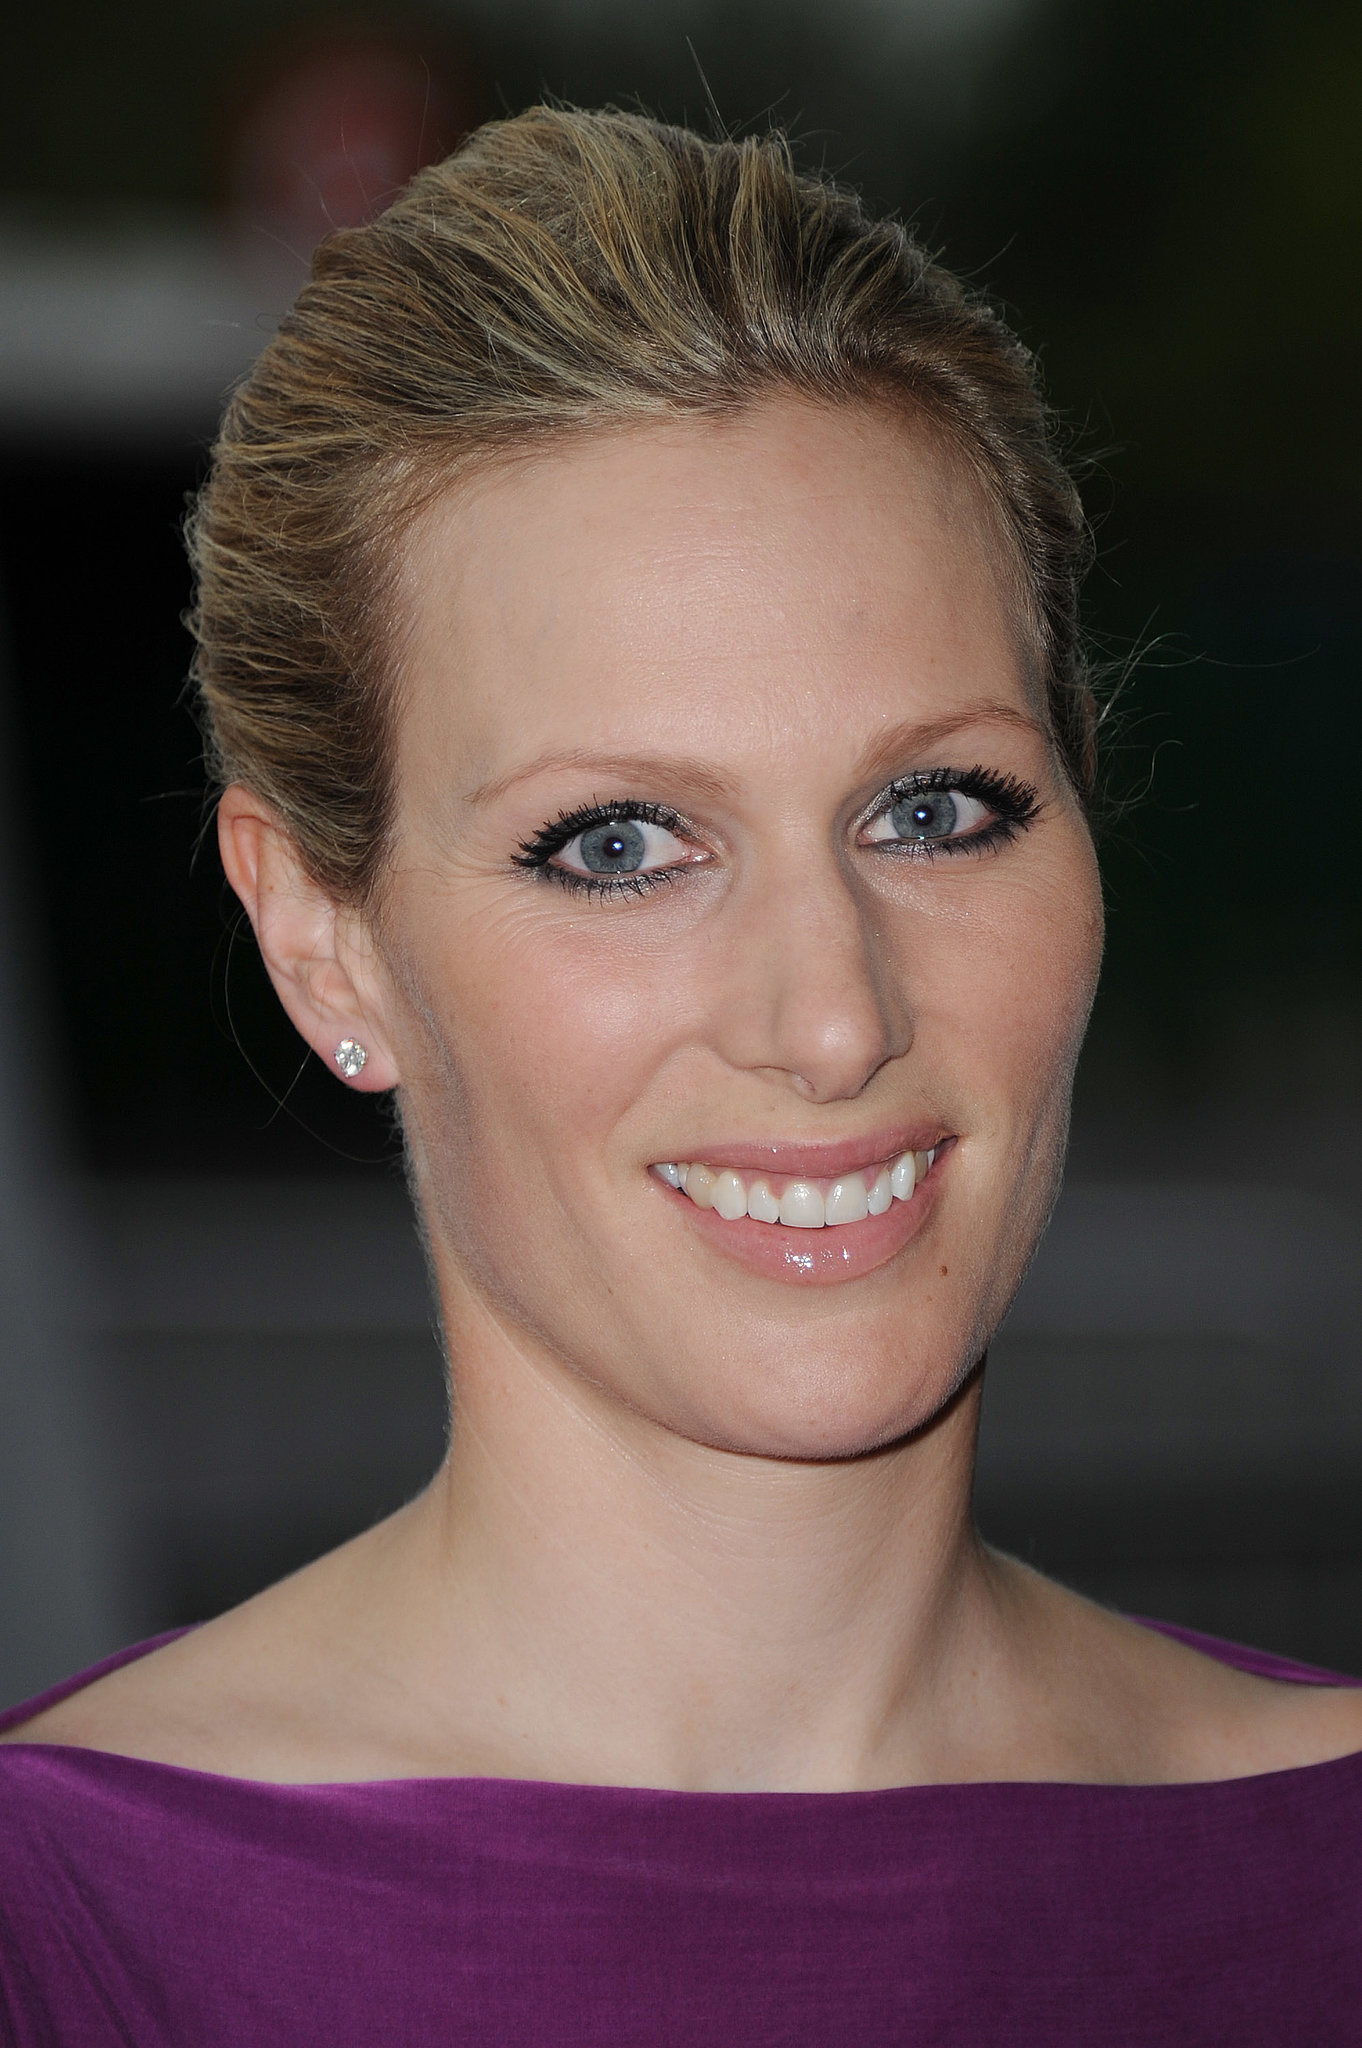 Zara Phillips Pictures, Images, Photos - Images77